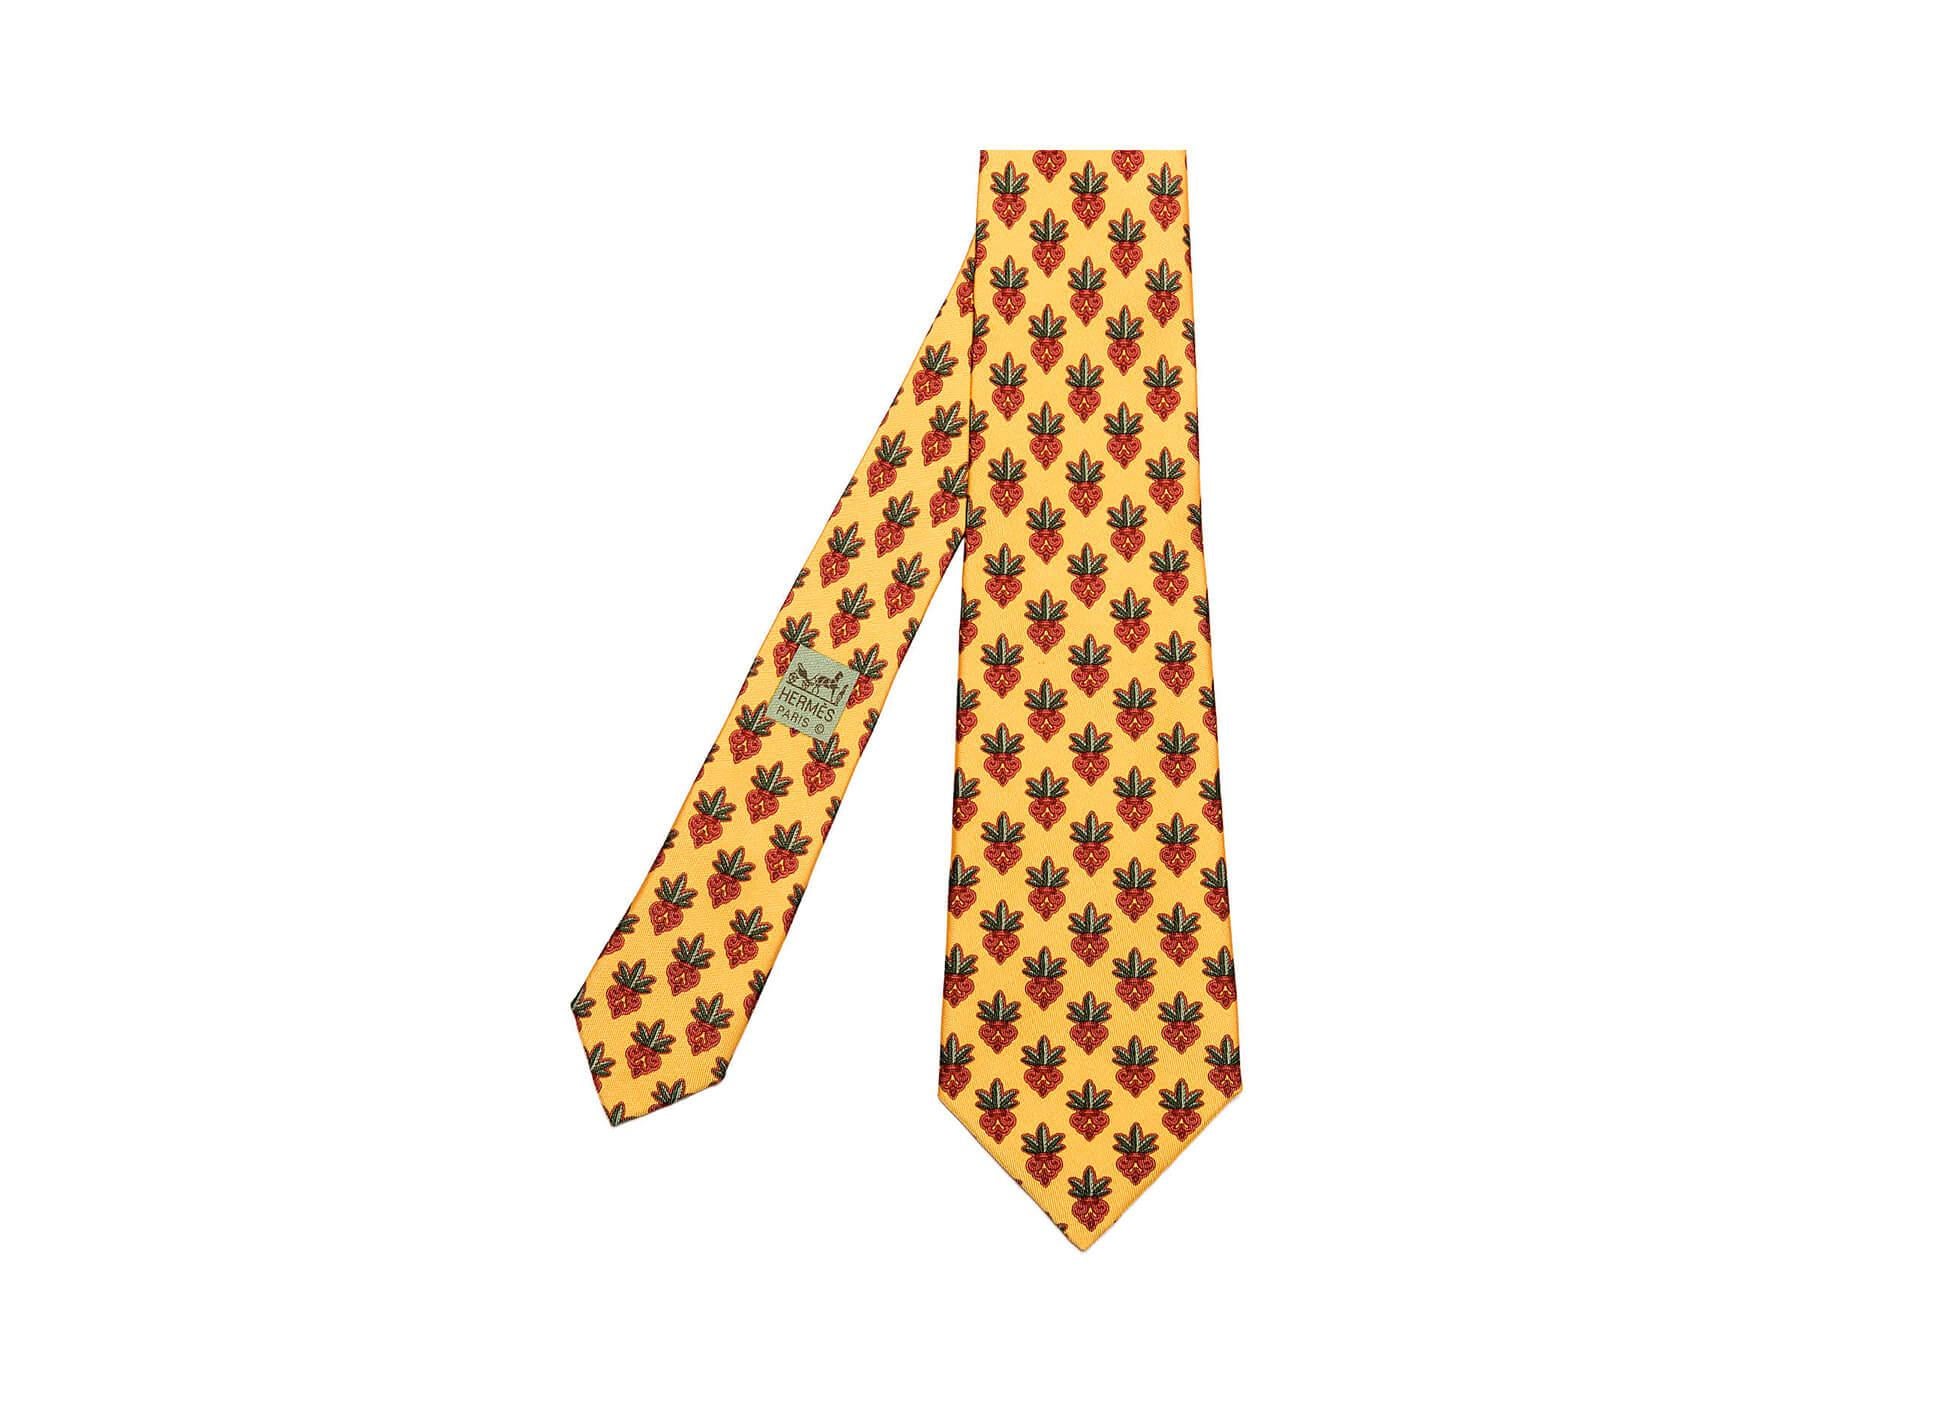 Pristine Vintage Hermes Silk Tie 'Scrolls' In Excellent Condition For Sale In London, GB